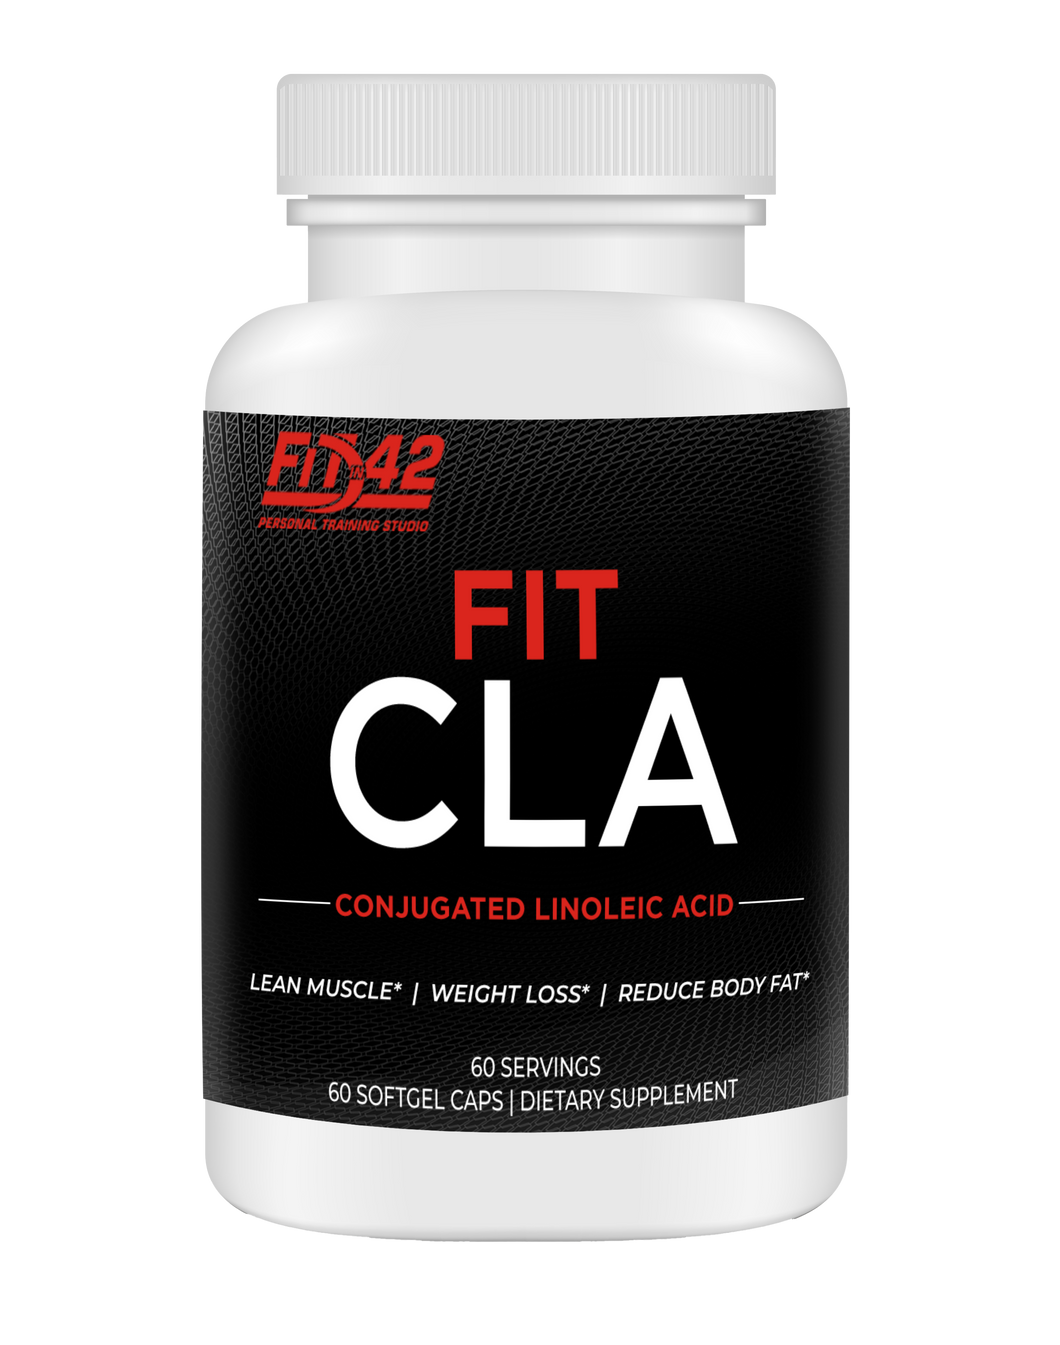 Fit CLA